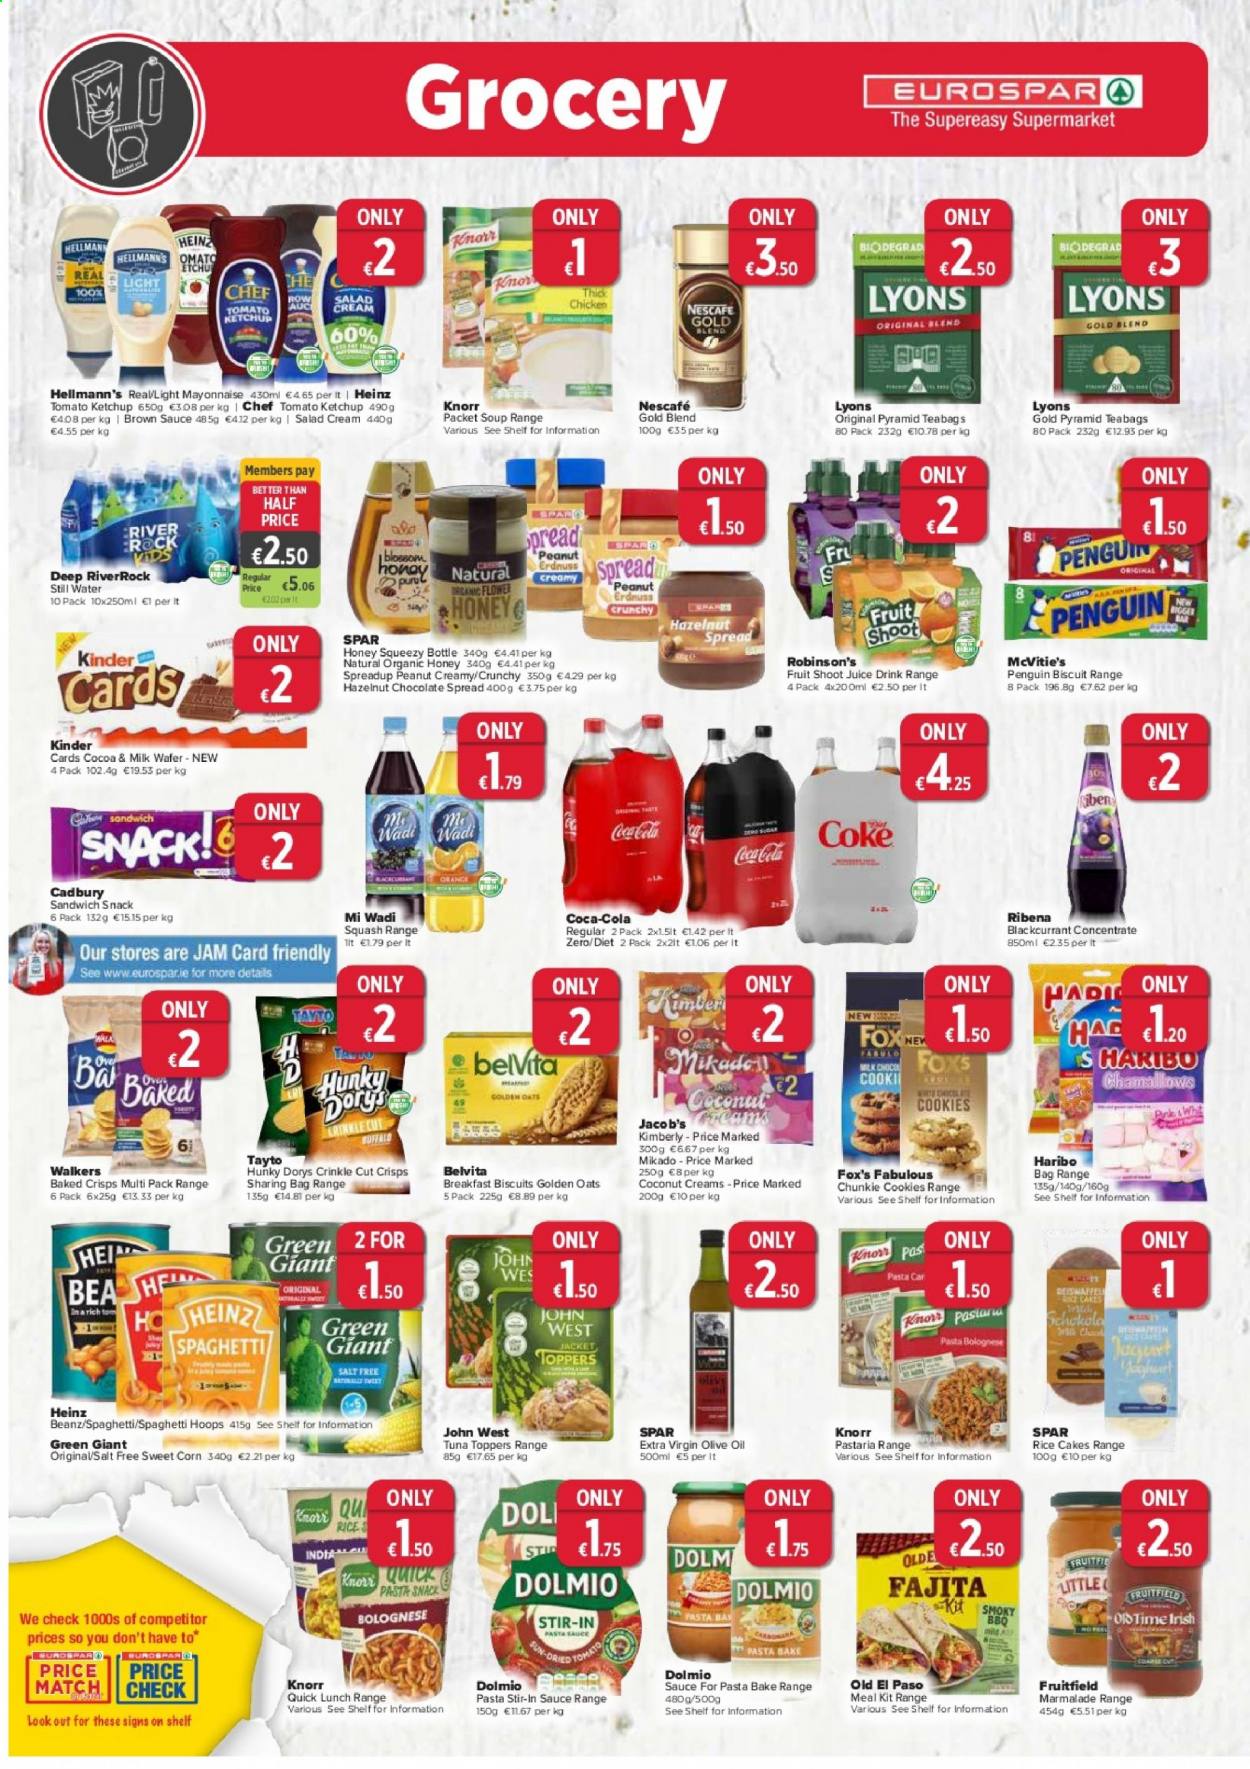 thumbnail - EUROSPAR offer  - 19.08.2021 - 08.09.2021 - Sales products - Old El Paso, corn, sweet corn, coconut, tuna, spaghetti, pasta sauce, soup, Knorr, Blossom, mayonnaise, salad cream, Hellmann’s, cookies, wafers, snack, Haribo, biscuit, Cadbury, Tayto, oats, Heinz, belVita, rice, ketchup, brown sauce, extra virgin olive oil, olive oil, oil, honey, fruit jam, hazelnut spread, Coca-Cola, juice, mineral water, bottled water, tea bags, Lyons, Nescafé. Page 6.